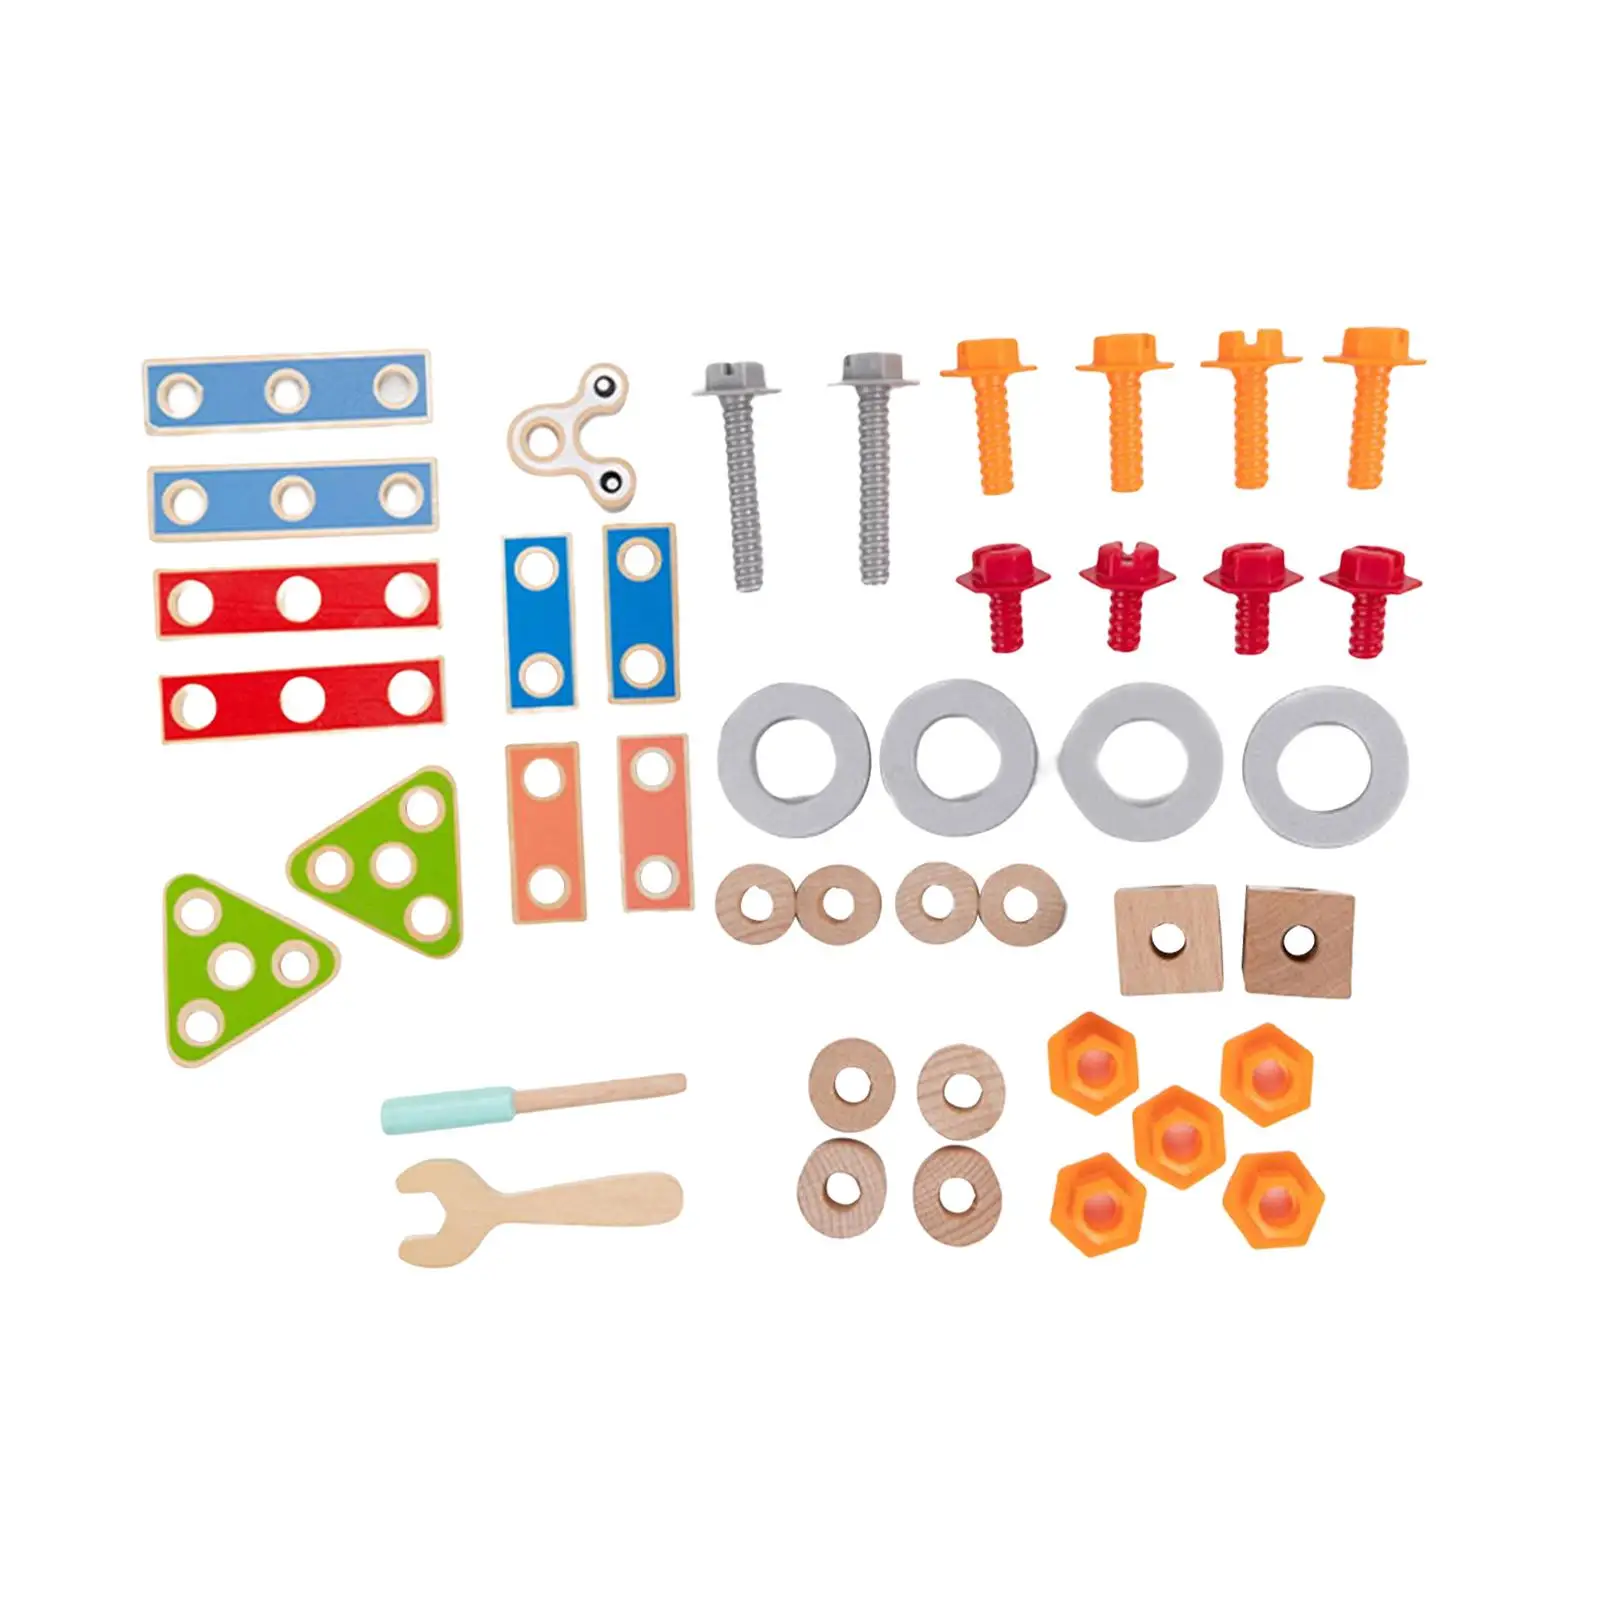 Wood Screw and Nut Set Uilding Blocks Construction Kit for Birthday Gift